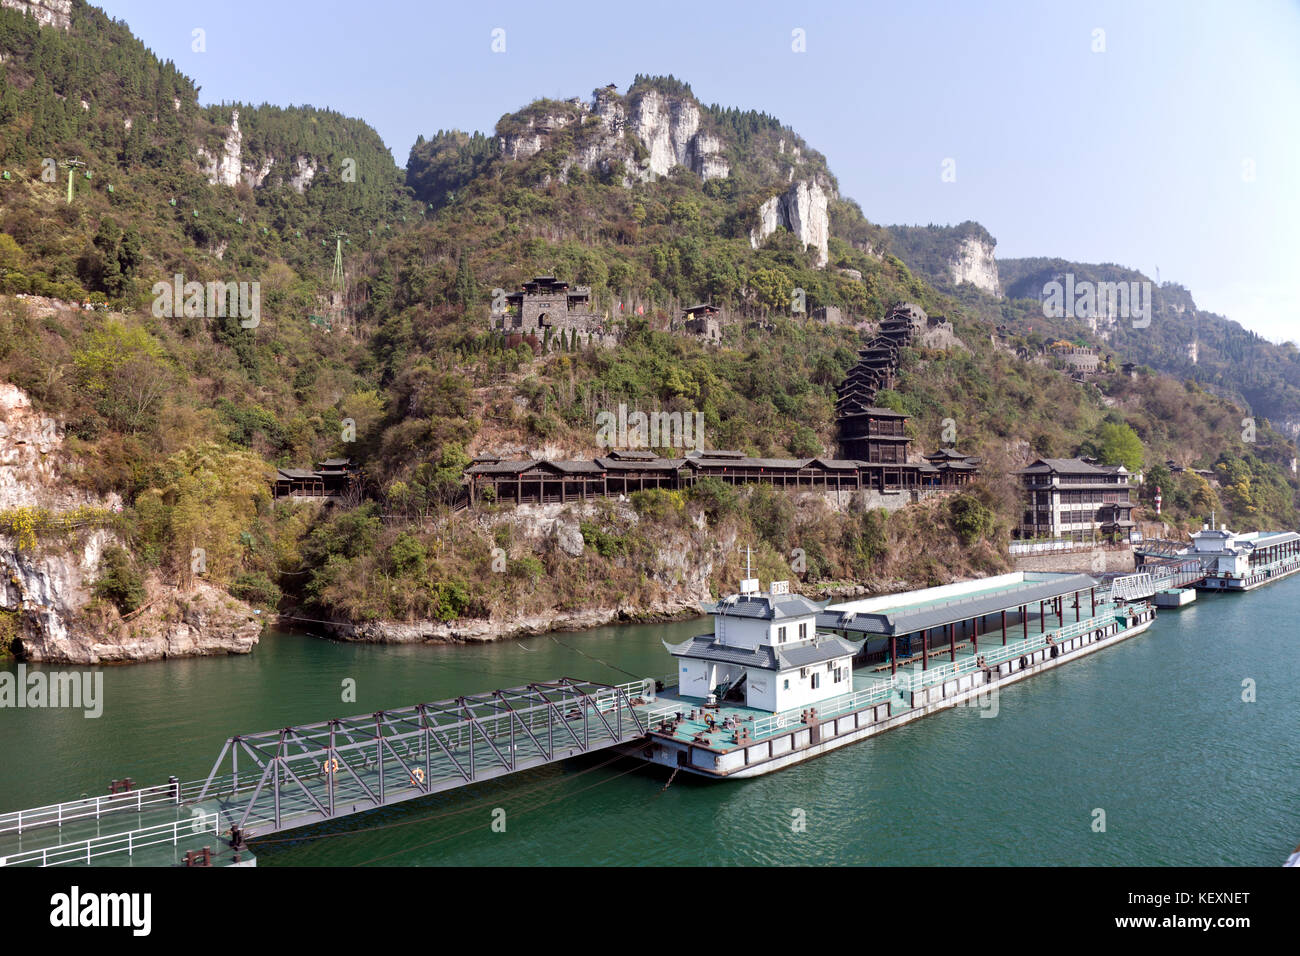 Extensive floating dockage to handle cruise passengers fronts a re-created traditional water village on the Yangtze River, a shore excursion for tourists cruising the river between Jingzhou and Chongqing. Visitors climb the covered stairway up to the village, a hefty hike. Stock Photo